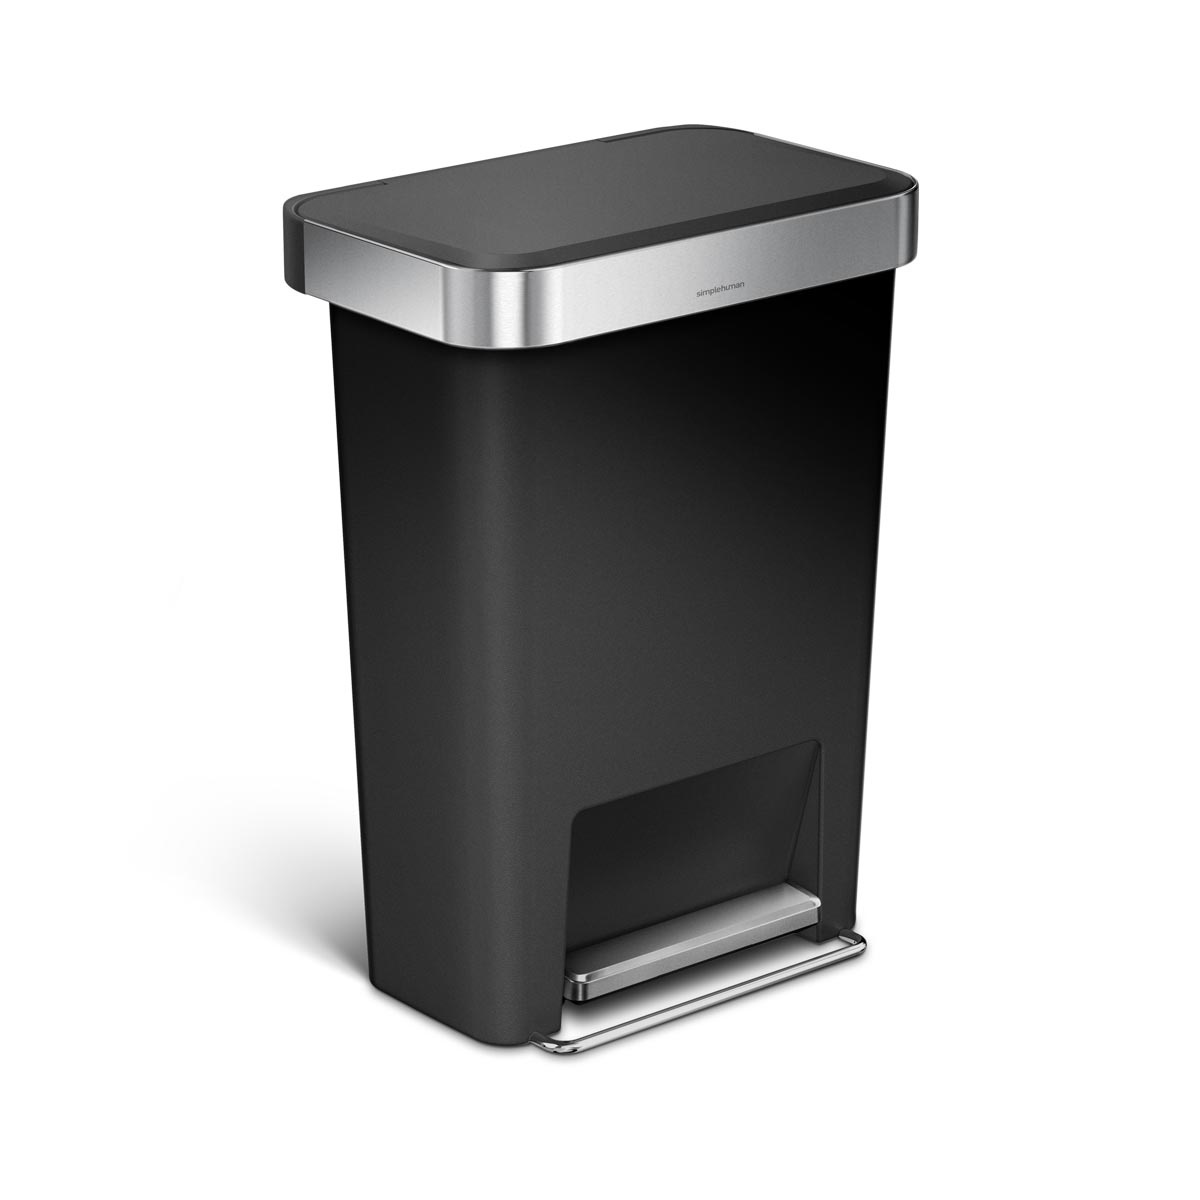 simplehuman 45 Liter Stainless Steel Sensor Trash Can with Liners